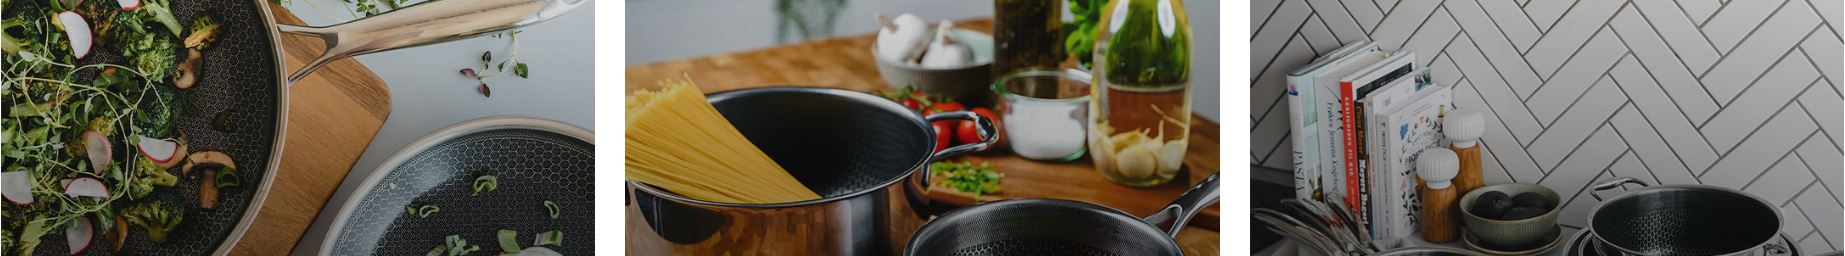 Onyx Cookware